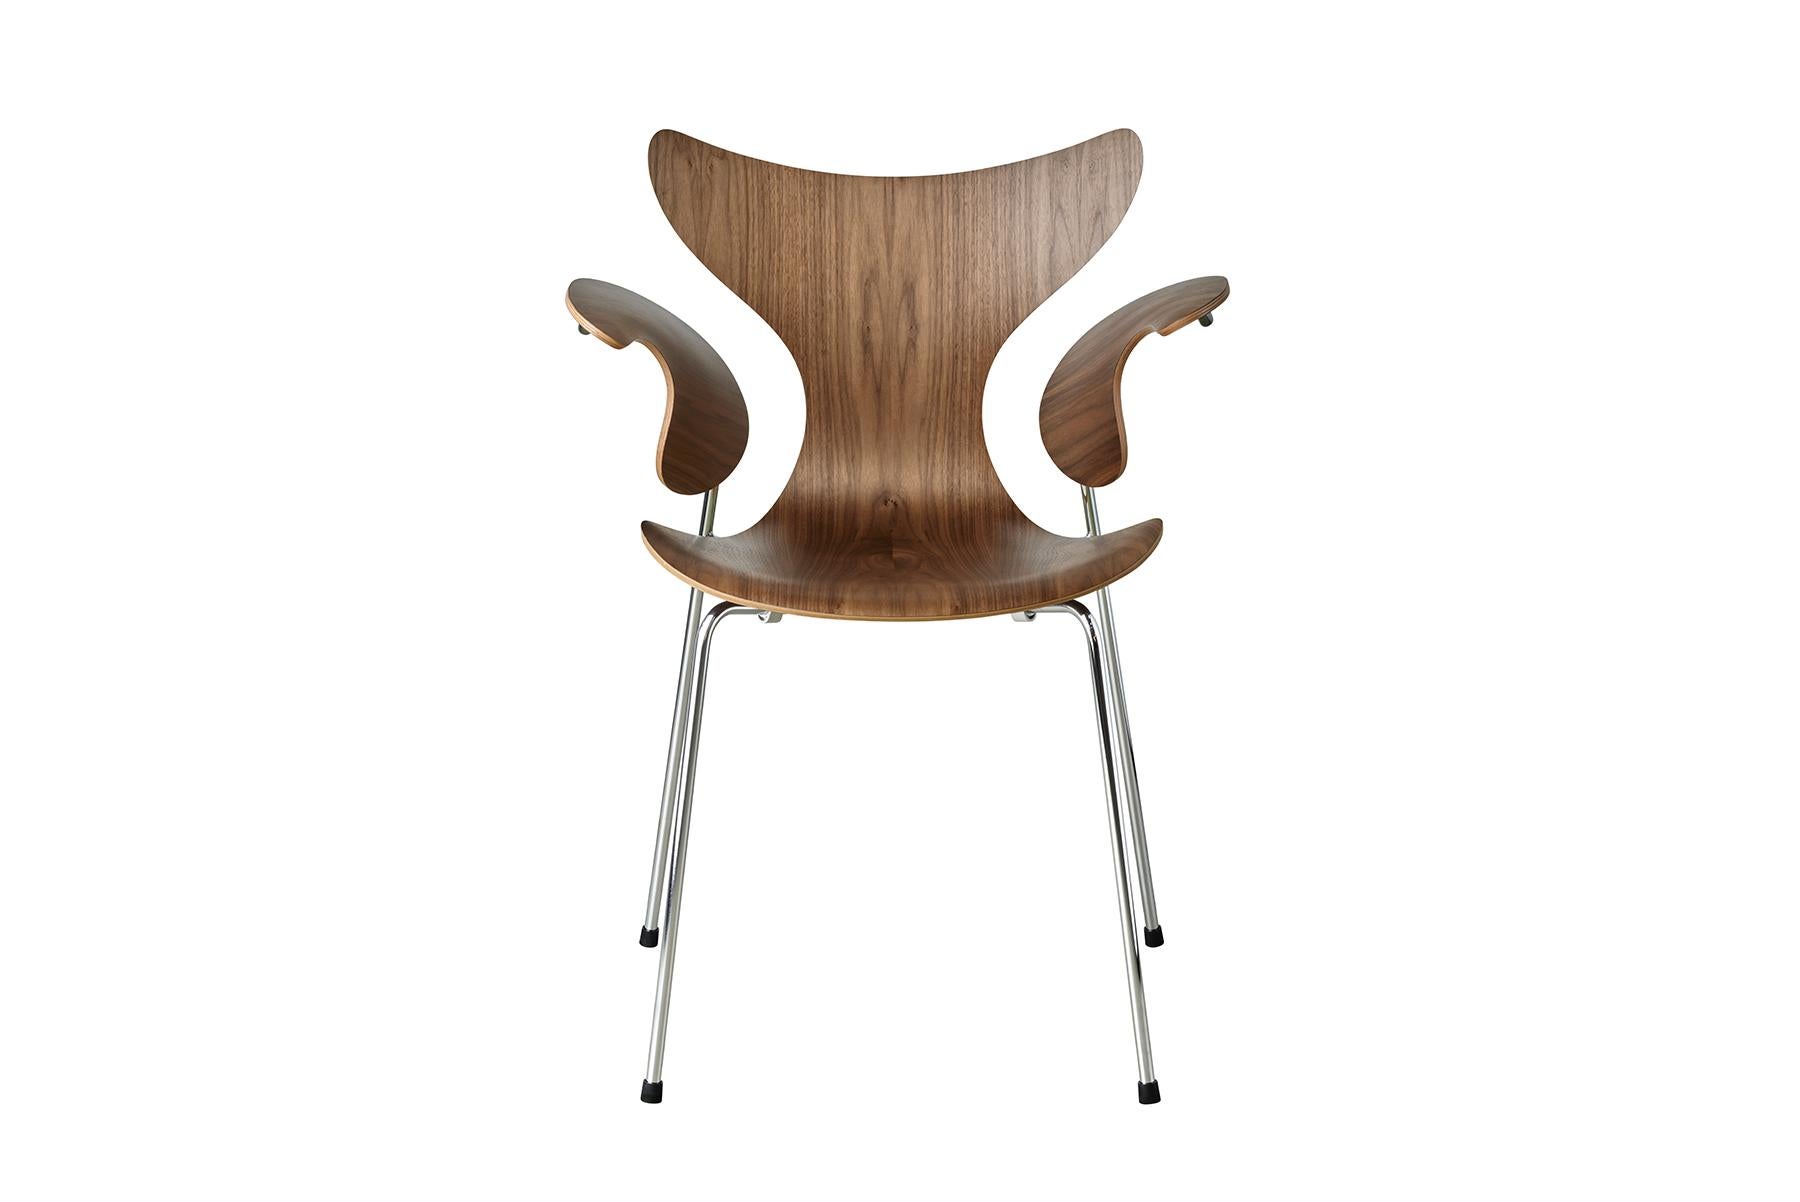 The Lily was originally designed for the Danish National Bank. The first model was 3108 from 1968, and the chair was introduced to the market with arms, model 3208, at the Danish Furniture Fair in 1970. The chair is made from laminated sliced veneer